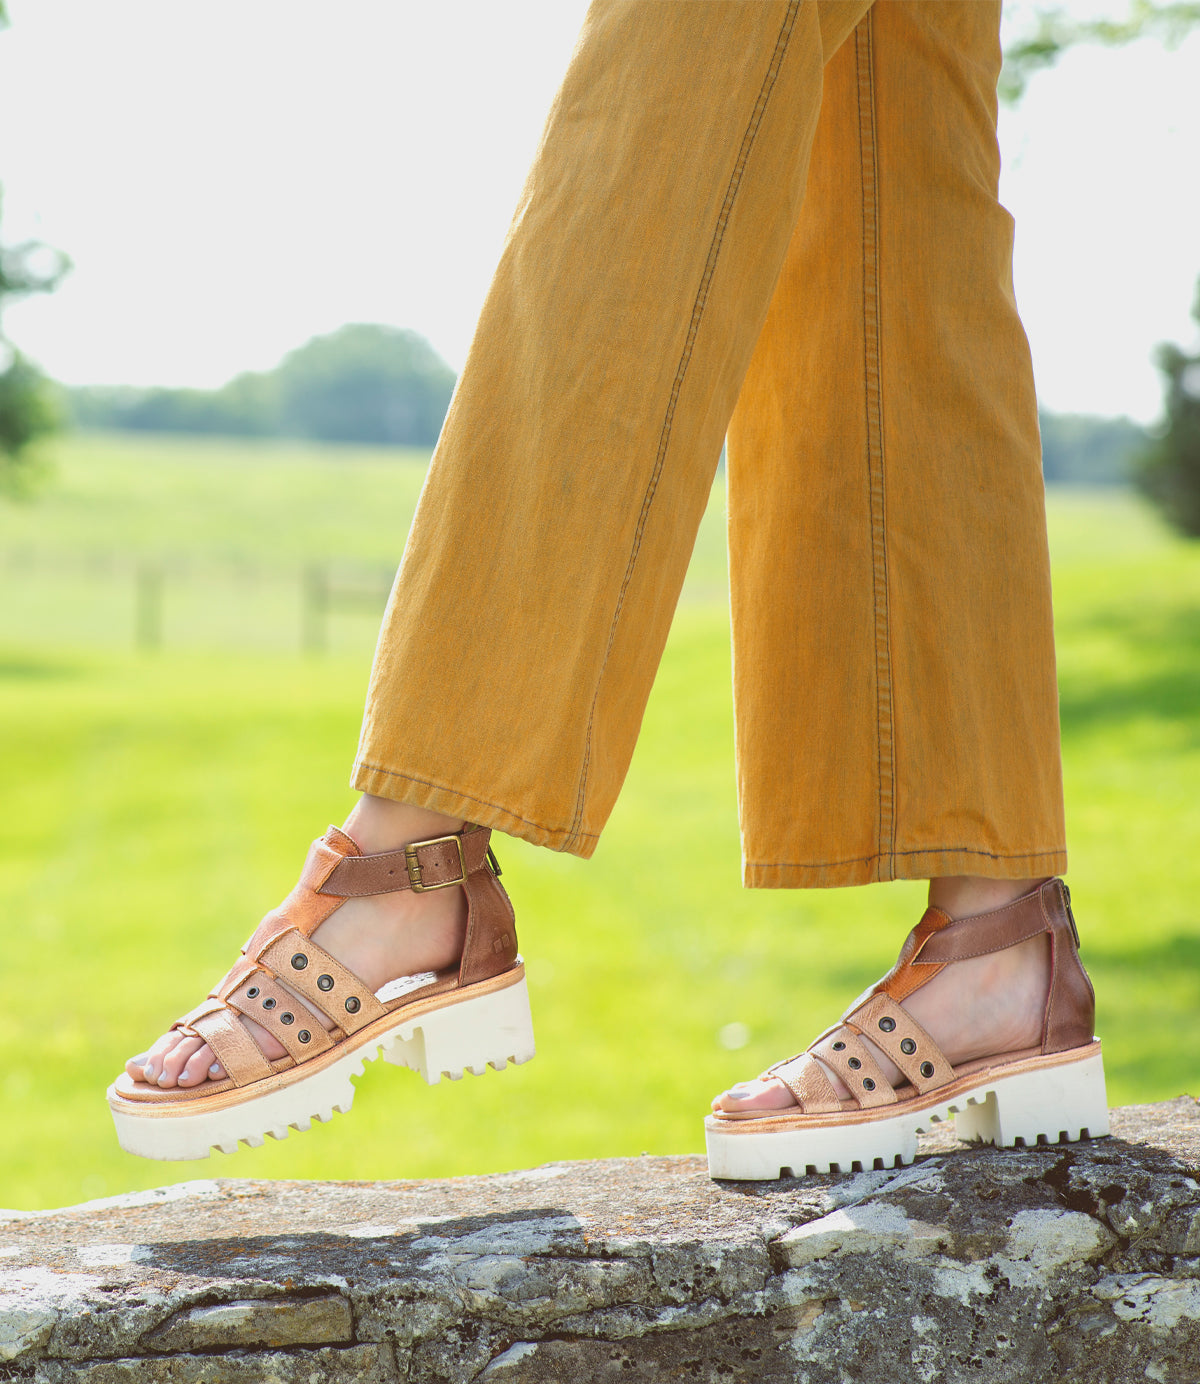 A woman wearing Bed Stu Pacifica sandals standing on a stone wall.